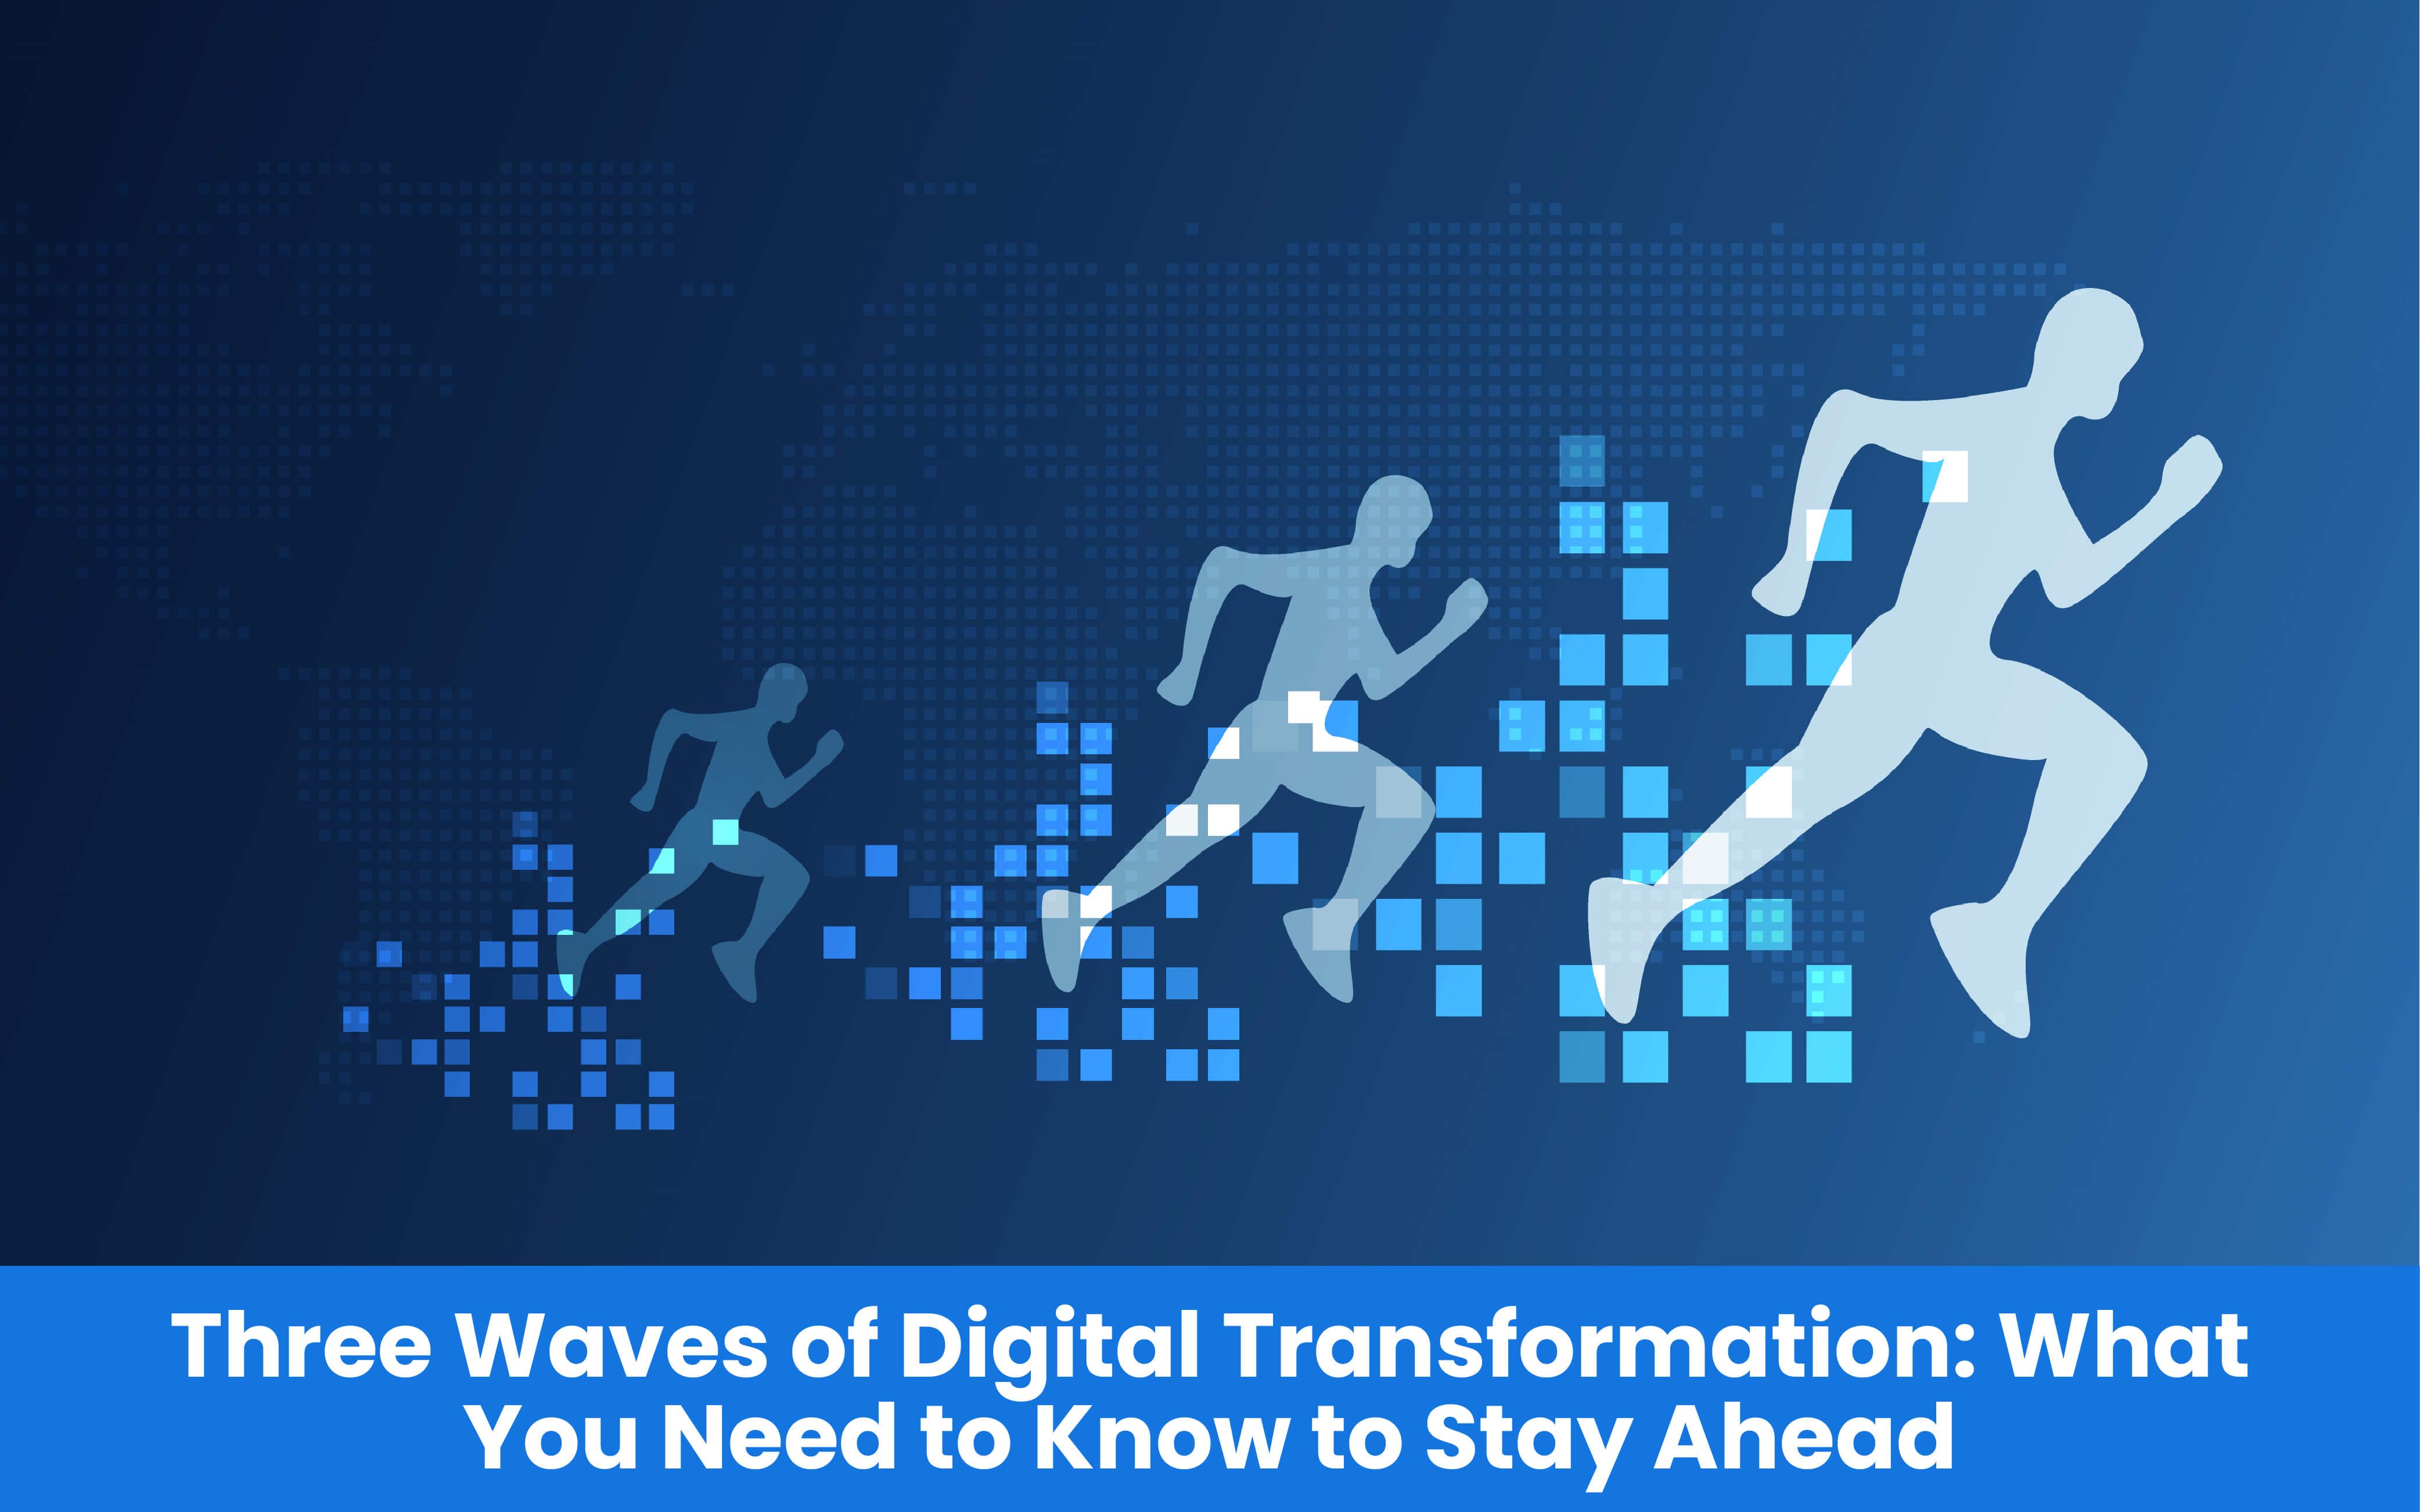 Three Waves of Digital Transformation: What You Need to Know to Stay Ahead